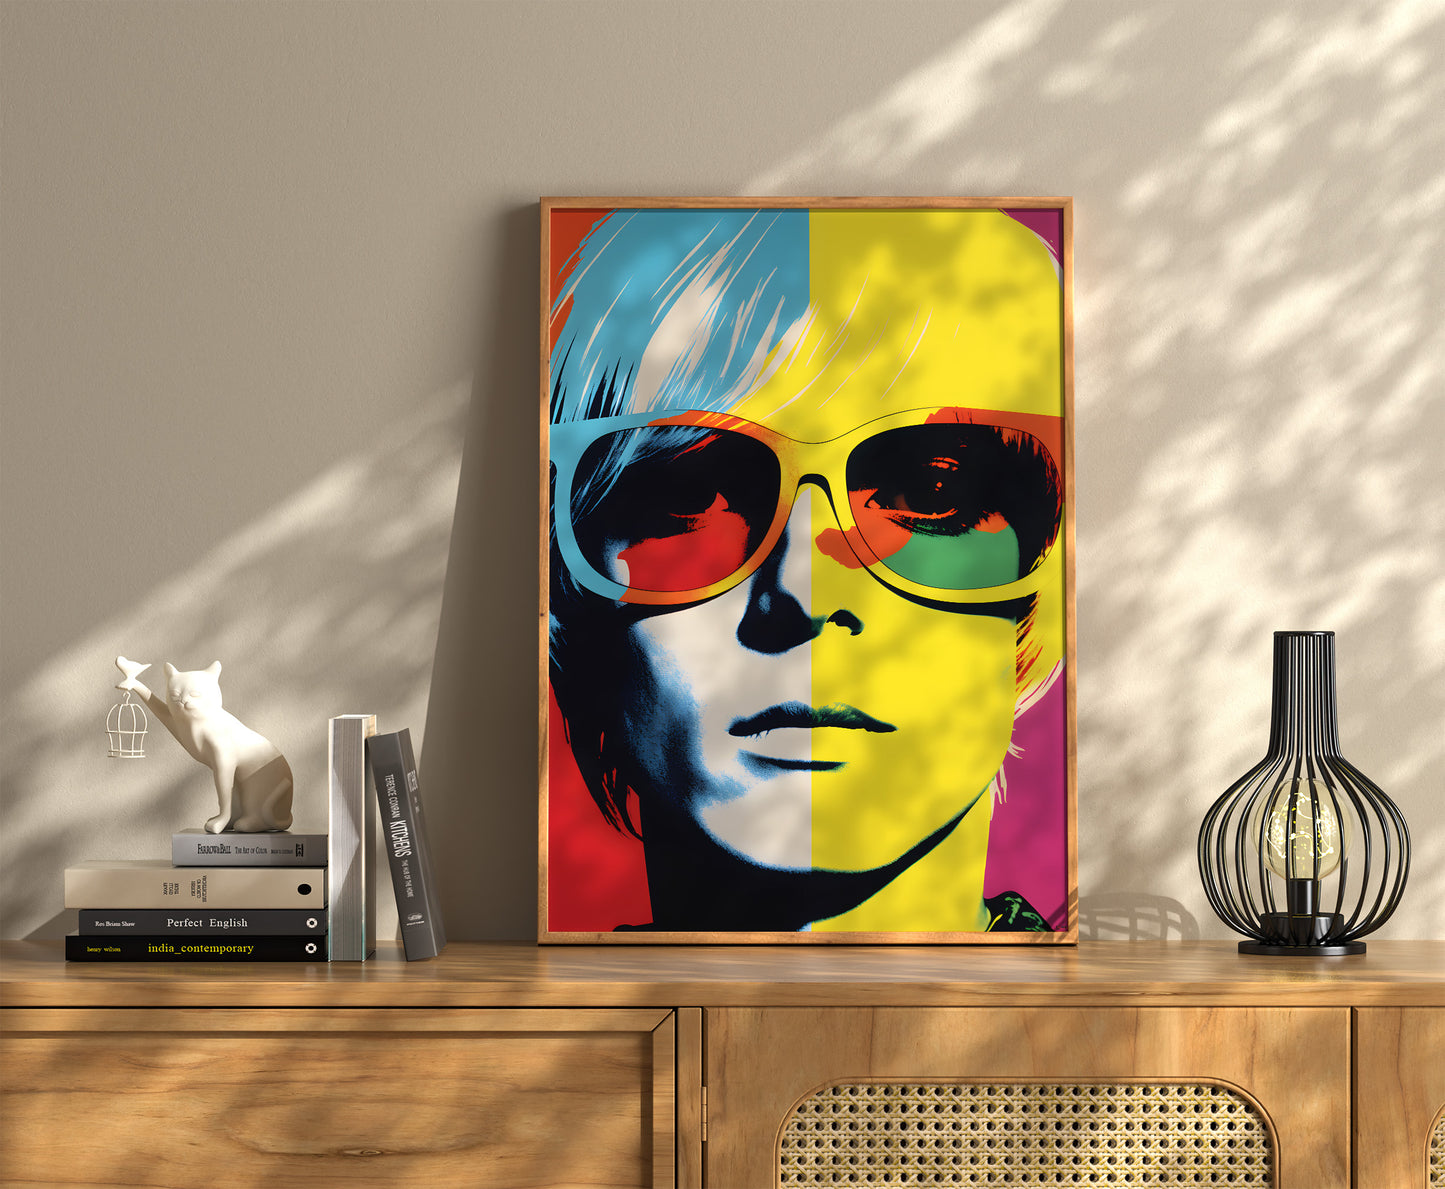 Pop art style portrait on a wall above a sideboard with decorative items.